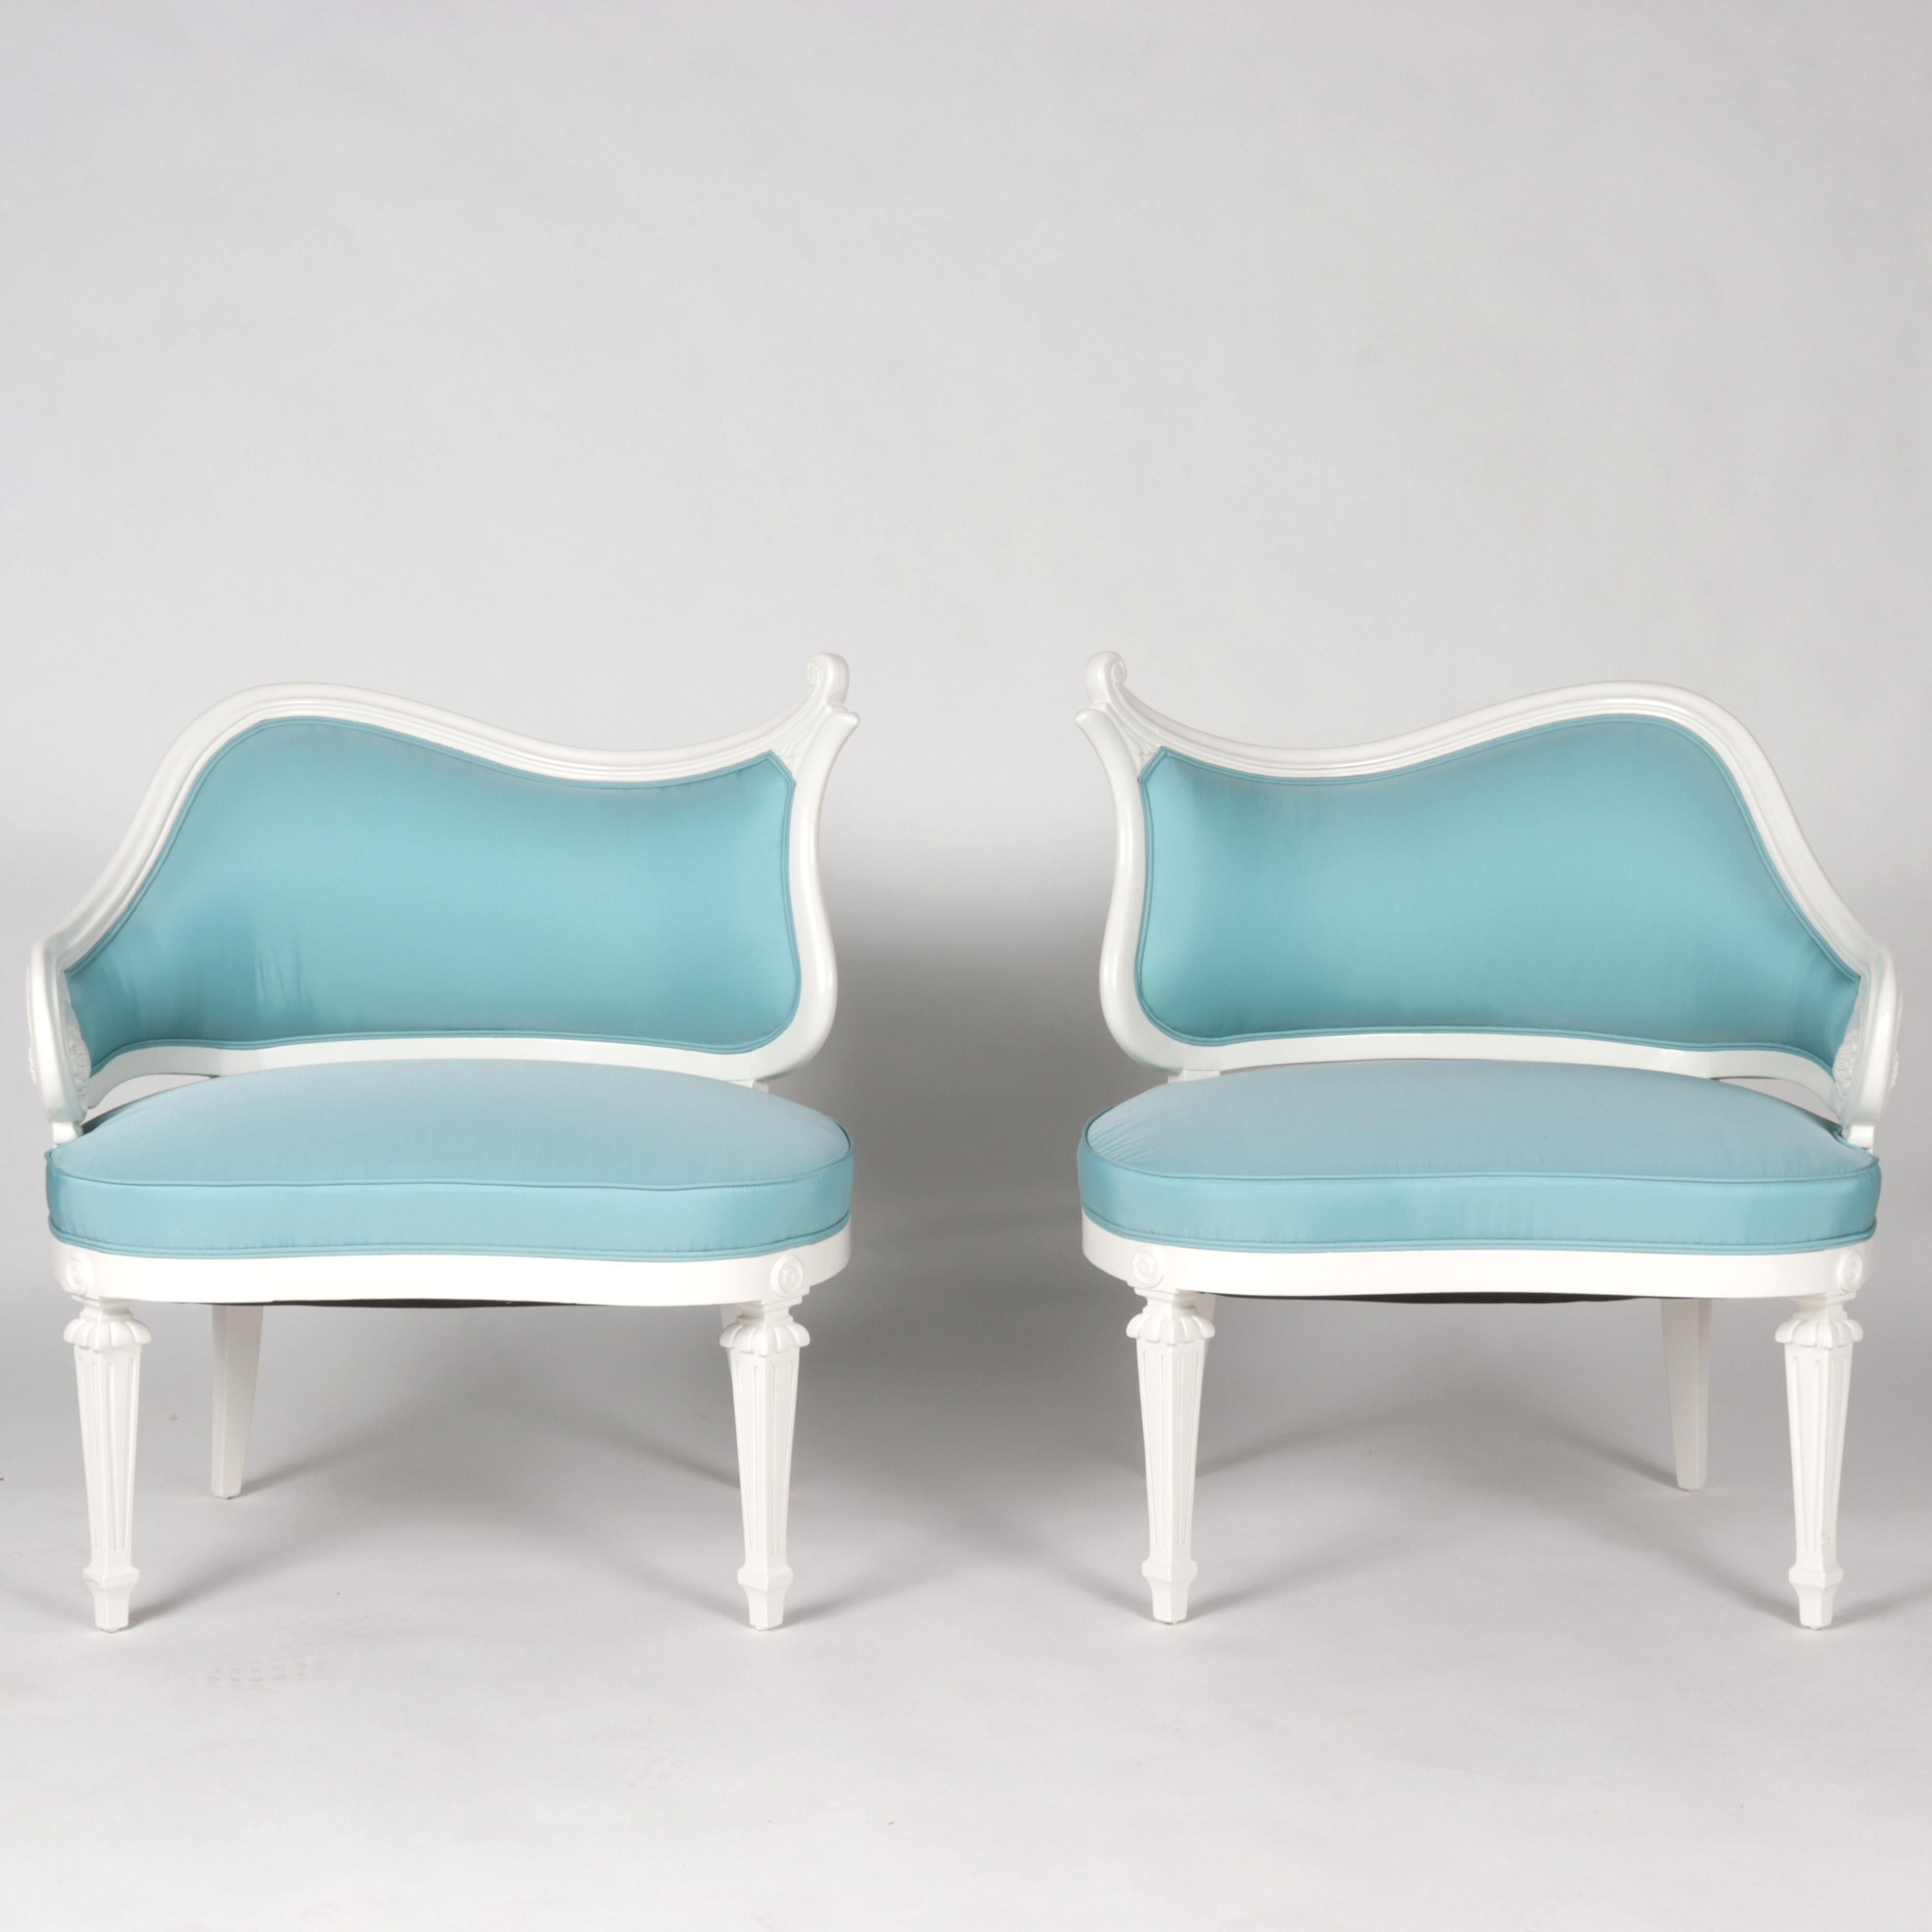 Pair of curved back chairs, c. 1960.